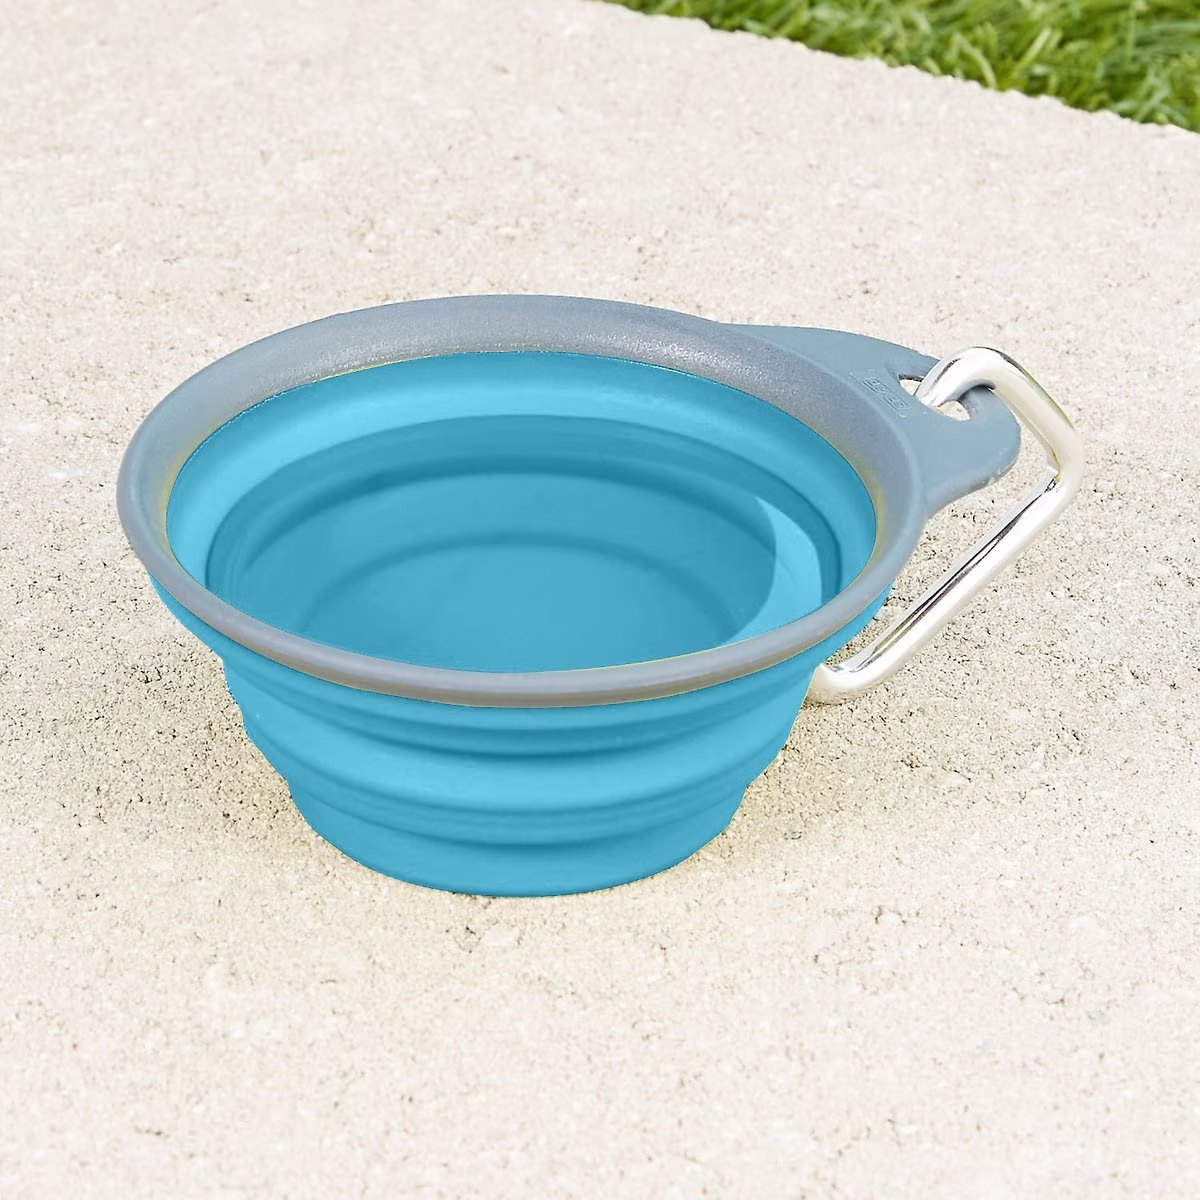 Dexas Popware Collapsible Dog Water Bowl new